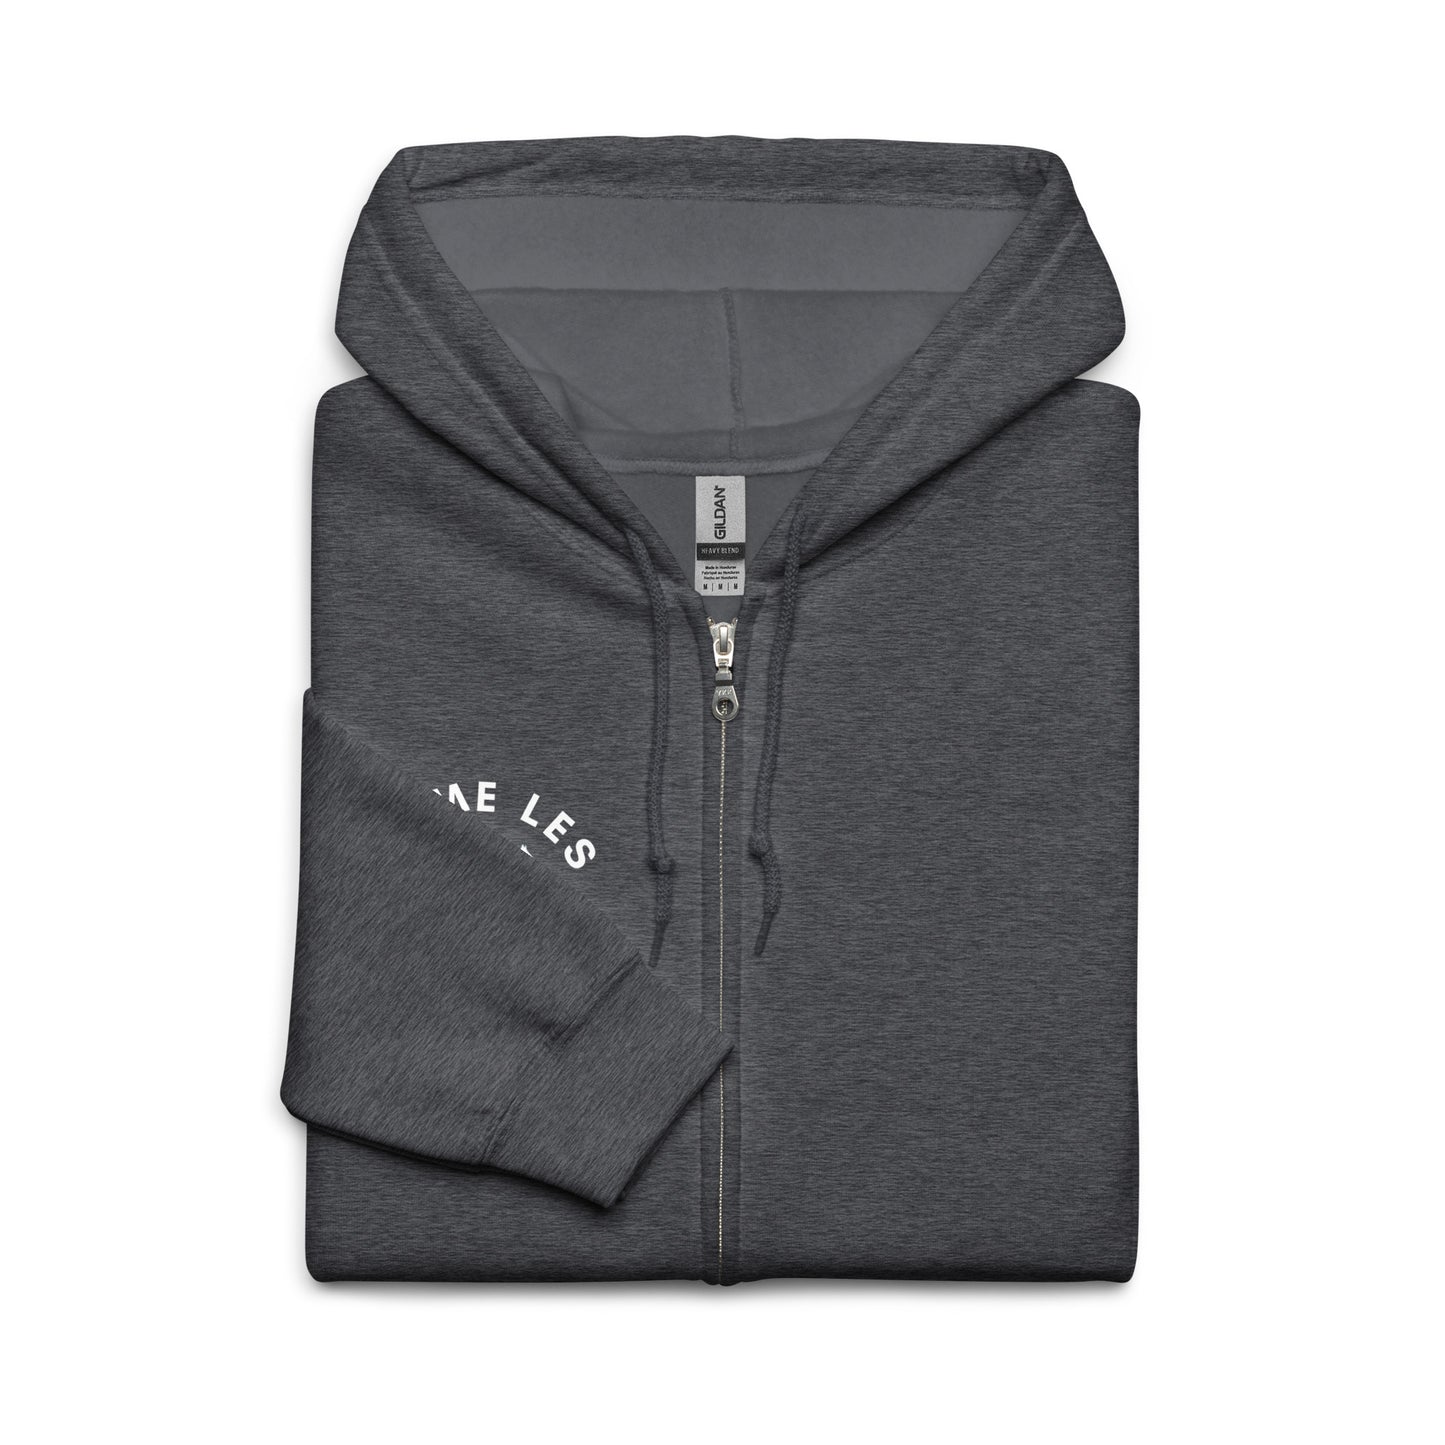 "I Love Horses" In French - Charcoal Grey Unisex Zip-up Hooded Sweatshirt